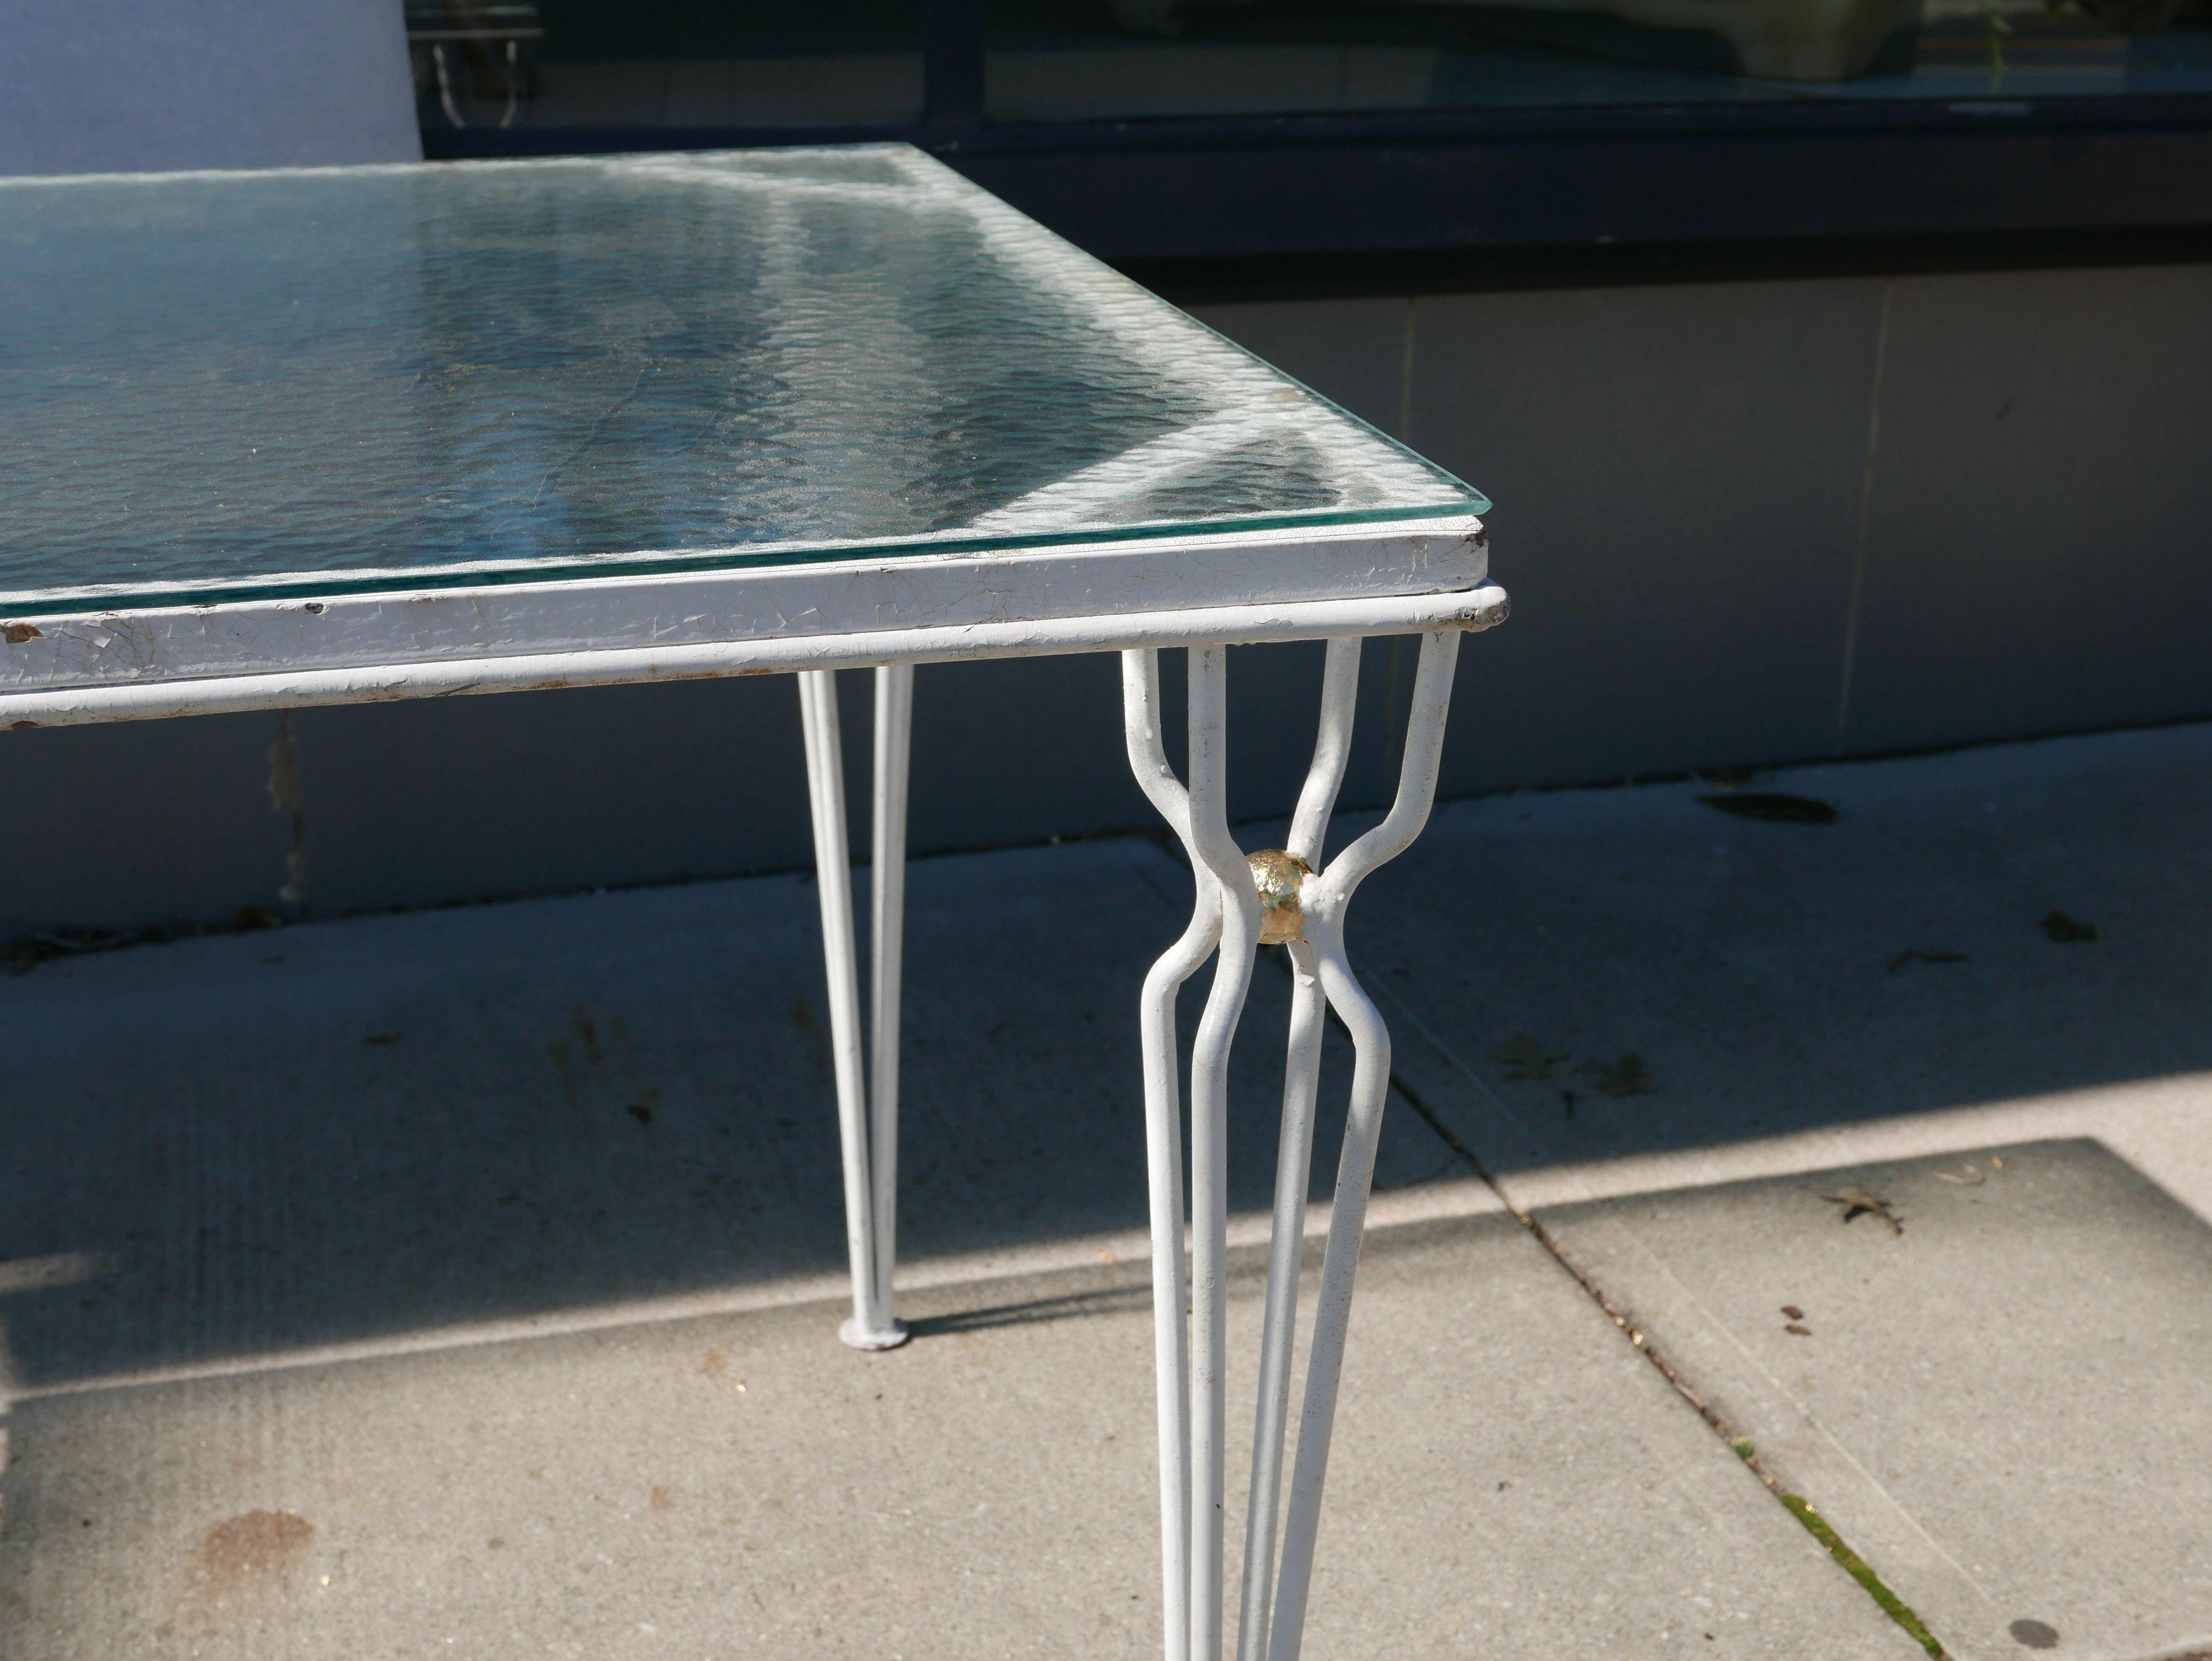 Stunning 1950s Jean Royere style table. Great style with vintage hammered glass textured top that is tempered.